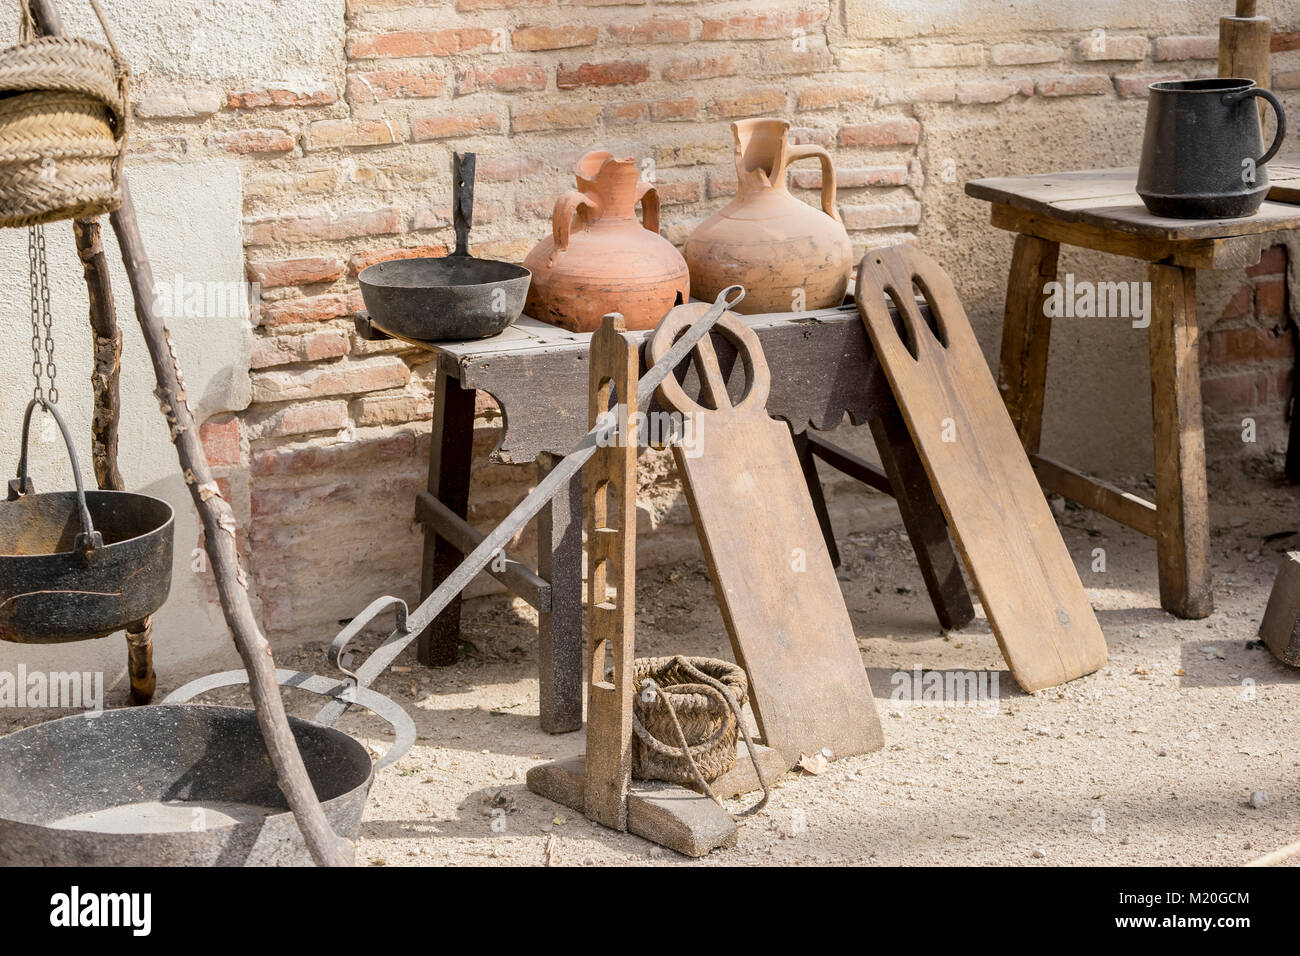 tools and utensils of medieval agriculture, ancient European farming instruments Stock Photo